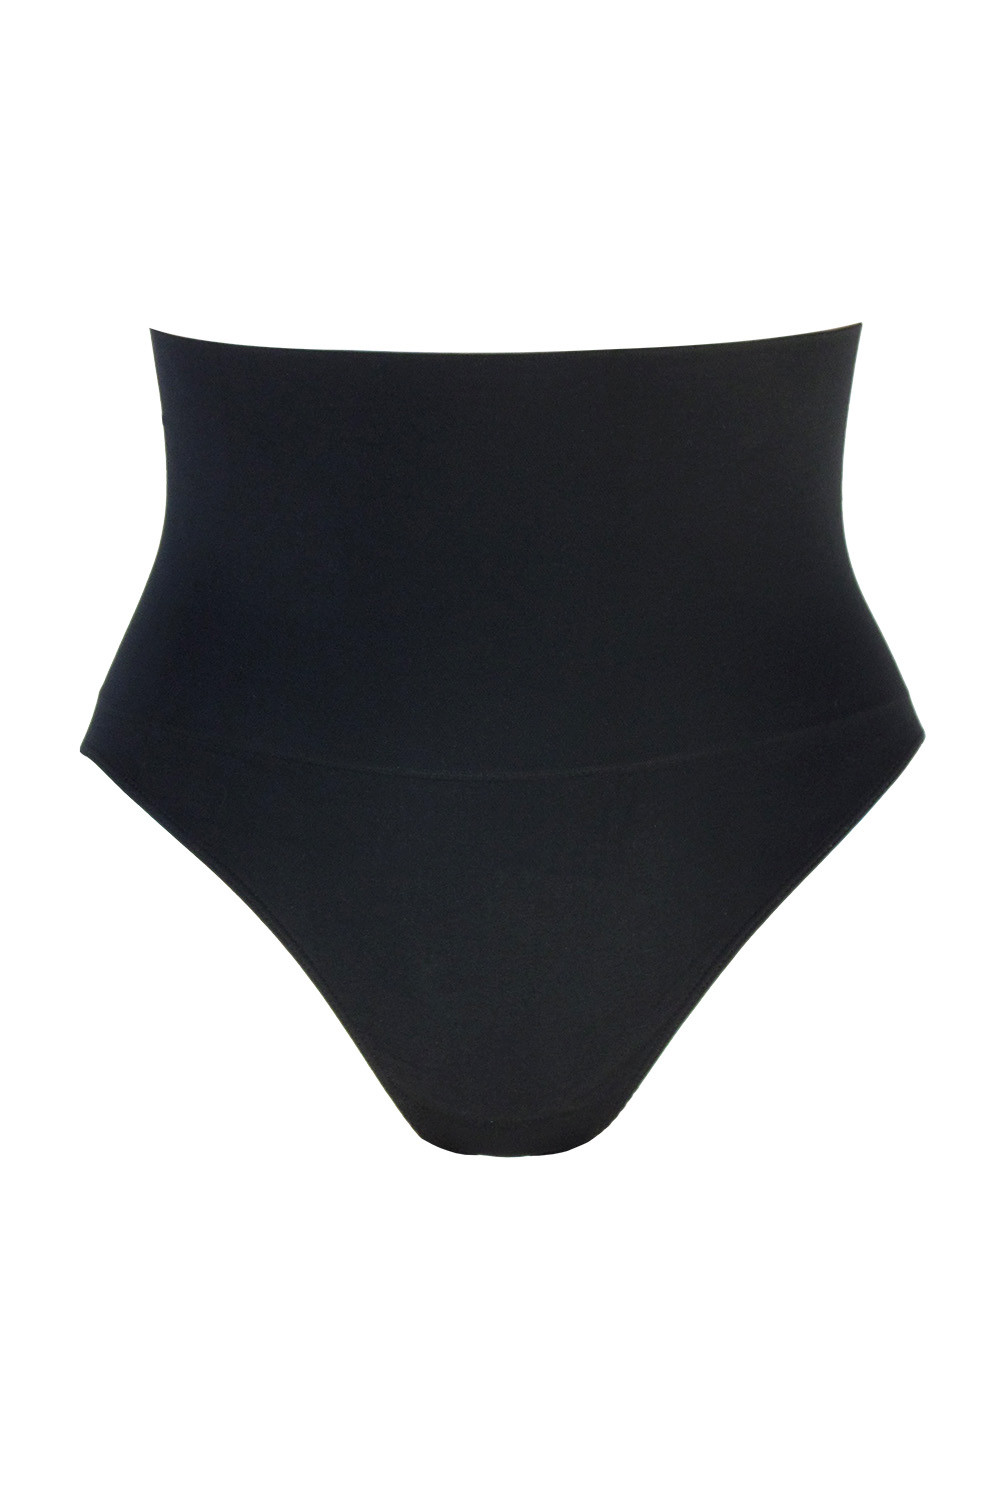 Hip shaping panty girdle made of microfiber and firm fabric